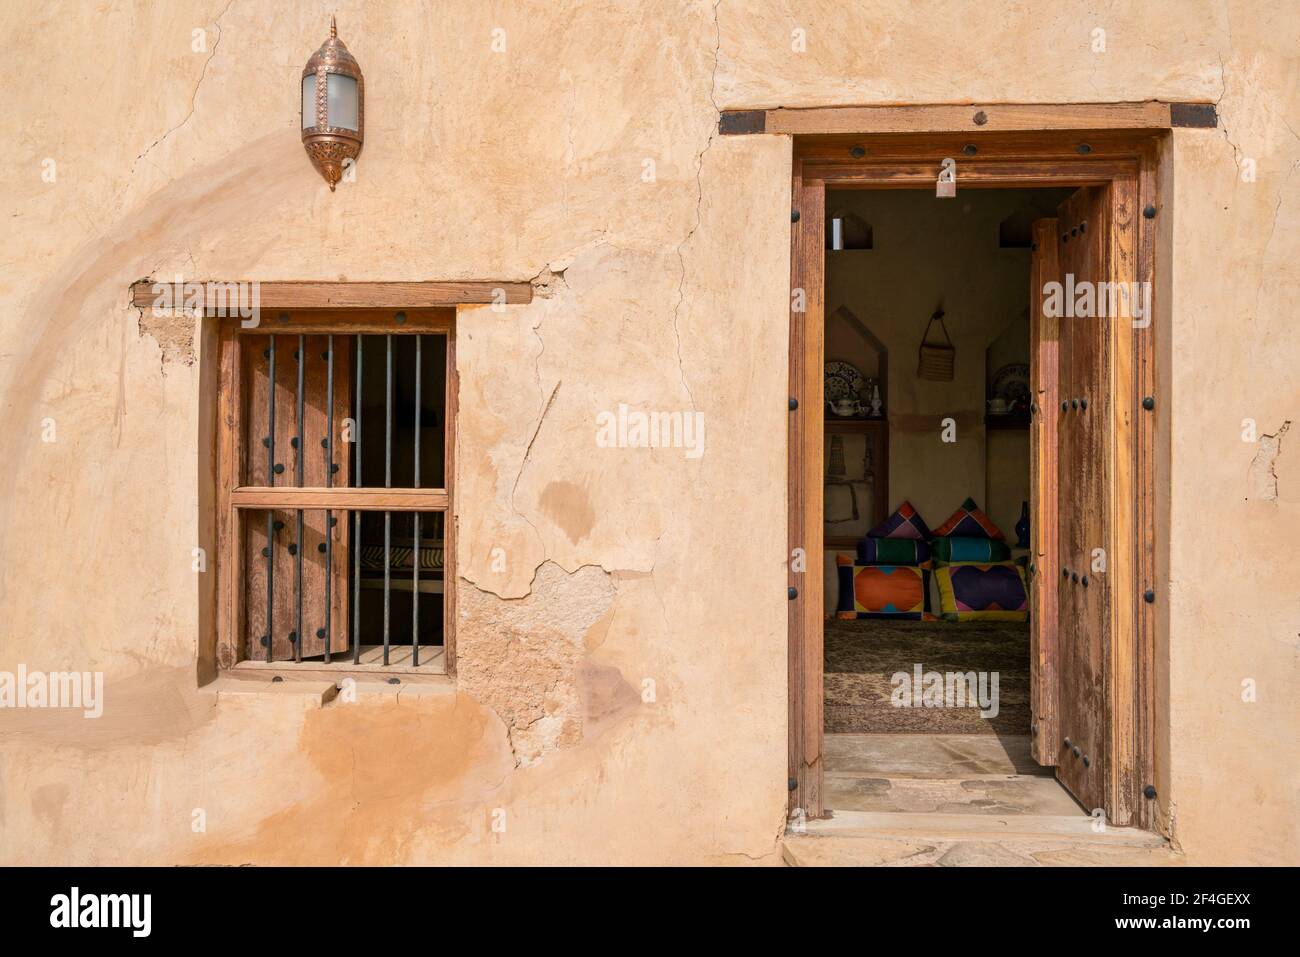 Wooden door and window leading into a room in medieval arabian fortress. Castle of Nakhal, Oman. Islamic architecture. Medieval middle east castle. Stock Photo